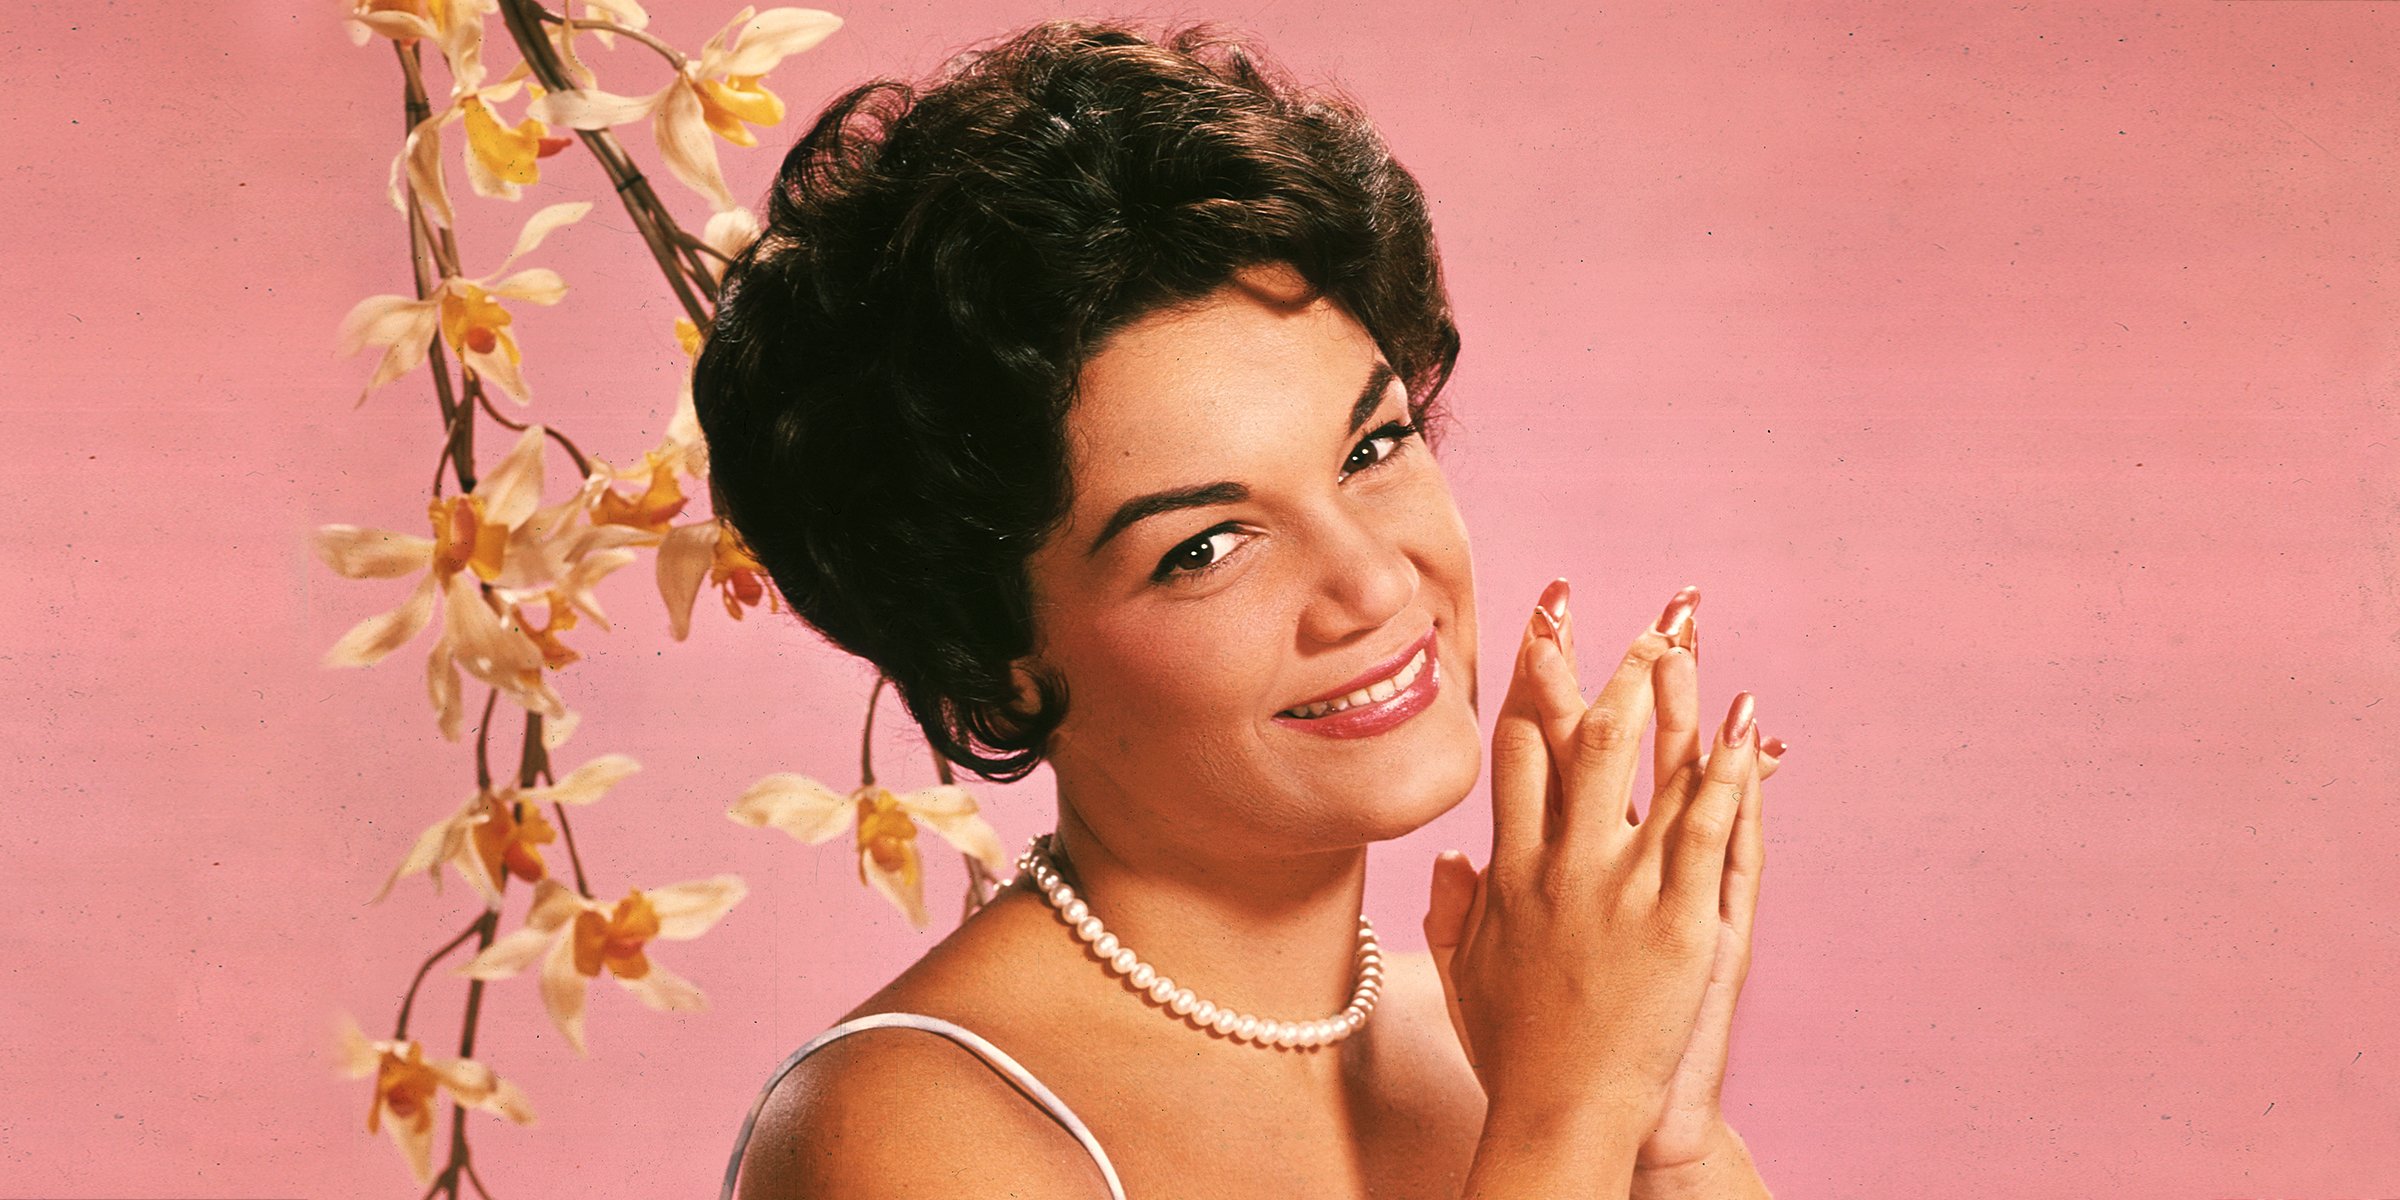 Singing Legend Connie Francis Turned 85 in 2022 — She Still Uses